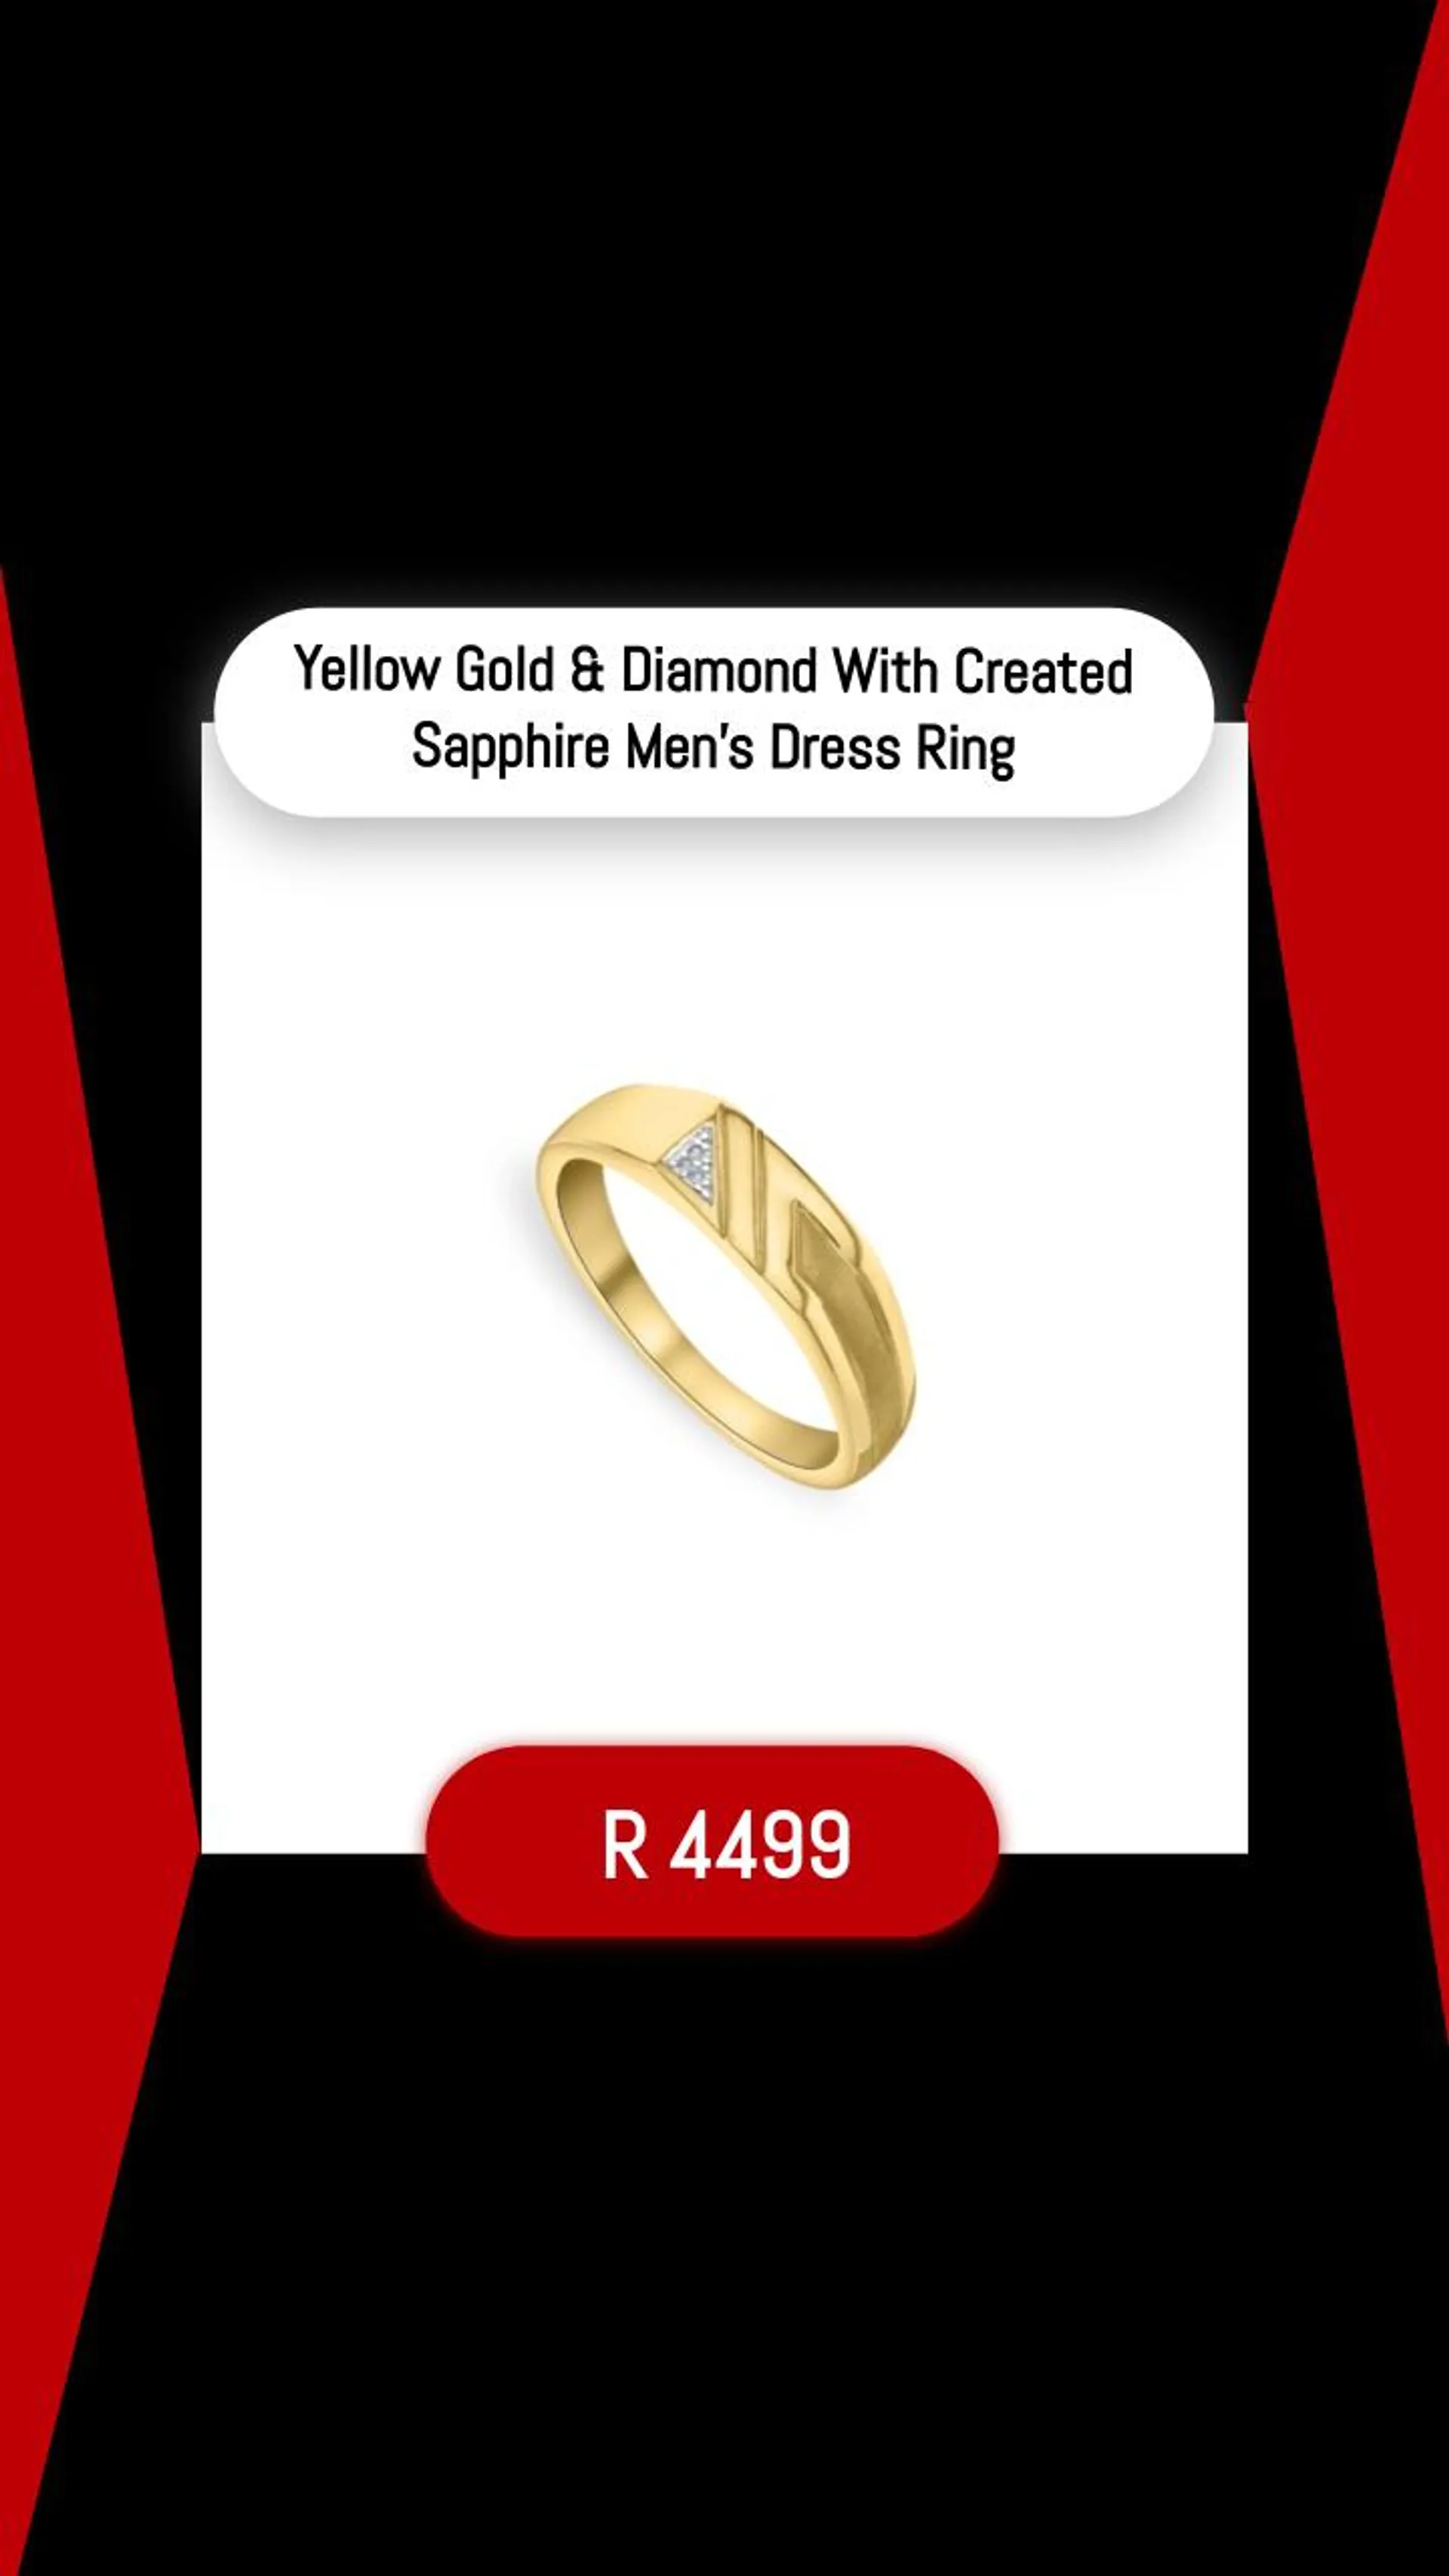 Yellow Gold & Diamond With Created Sapphire Mens Dress Ring